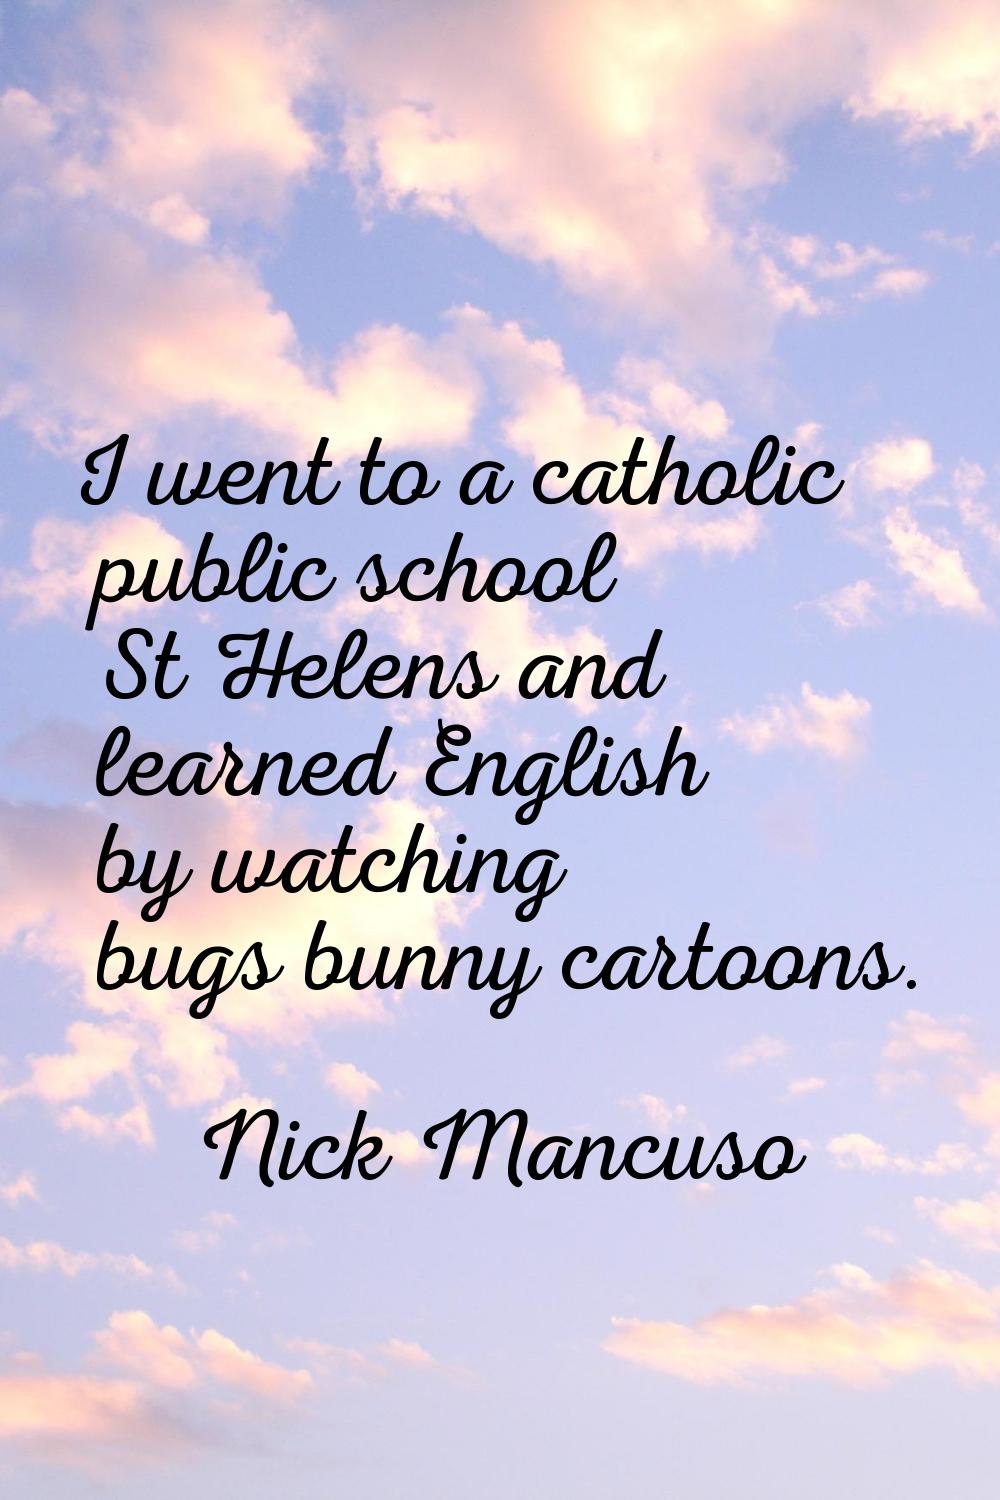 I went to a catholic public school St Helens and learned English by watching bugs bunny cartoons.